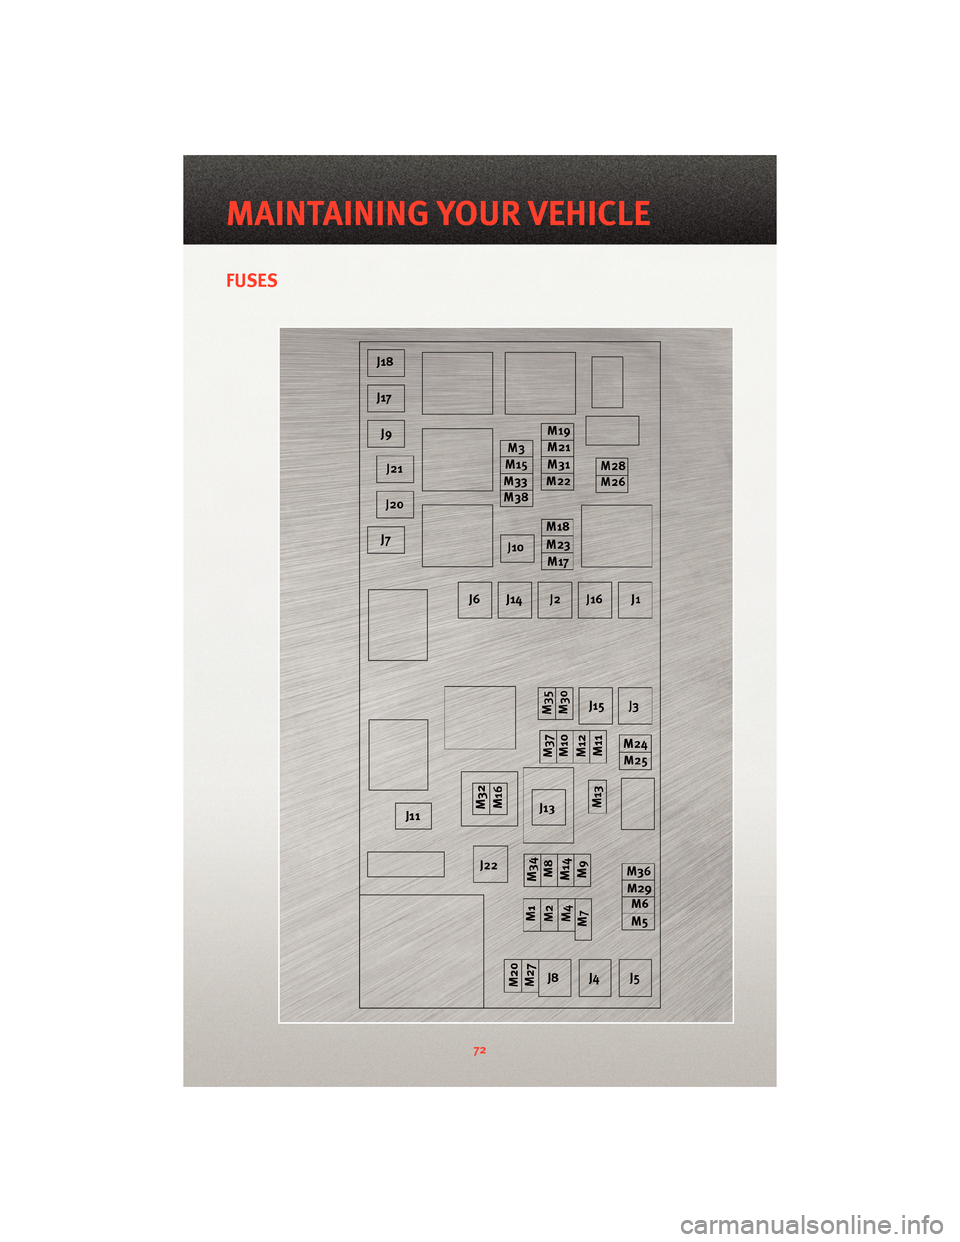 DODGE JOURNEY 2010 1.G User Guide FUSES
MAINTAINING YOUR VEHICLE
72 